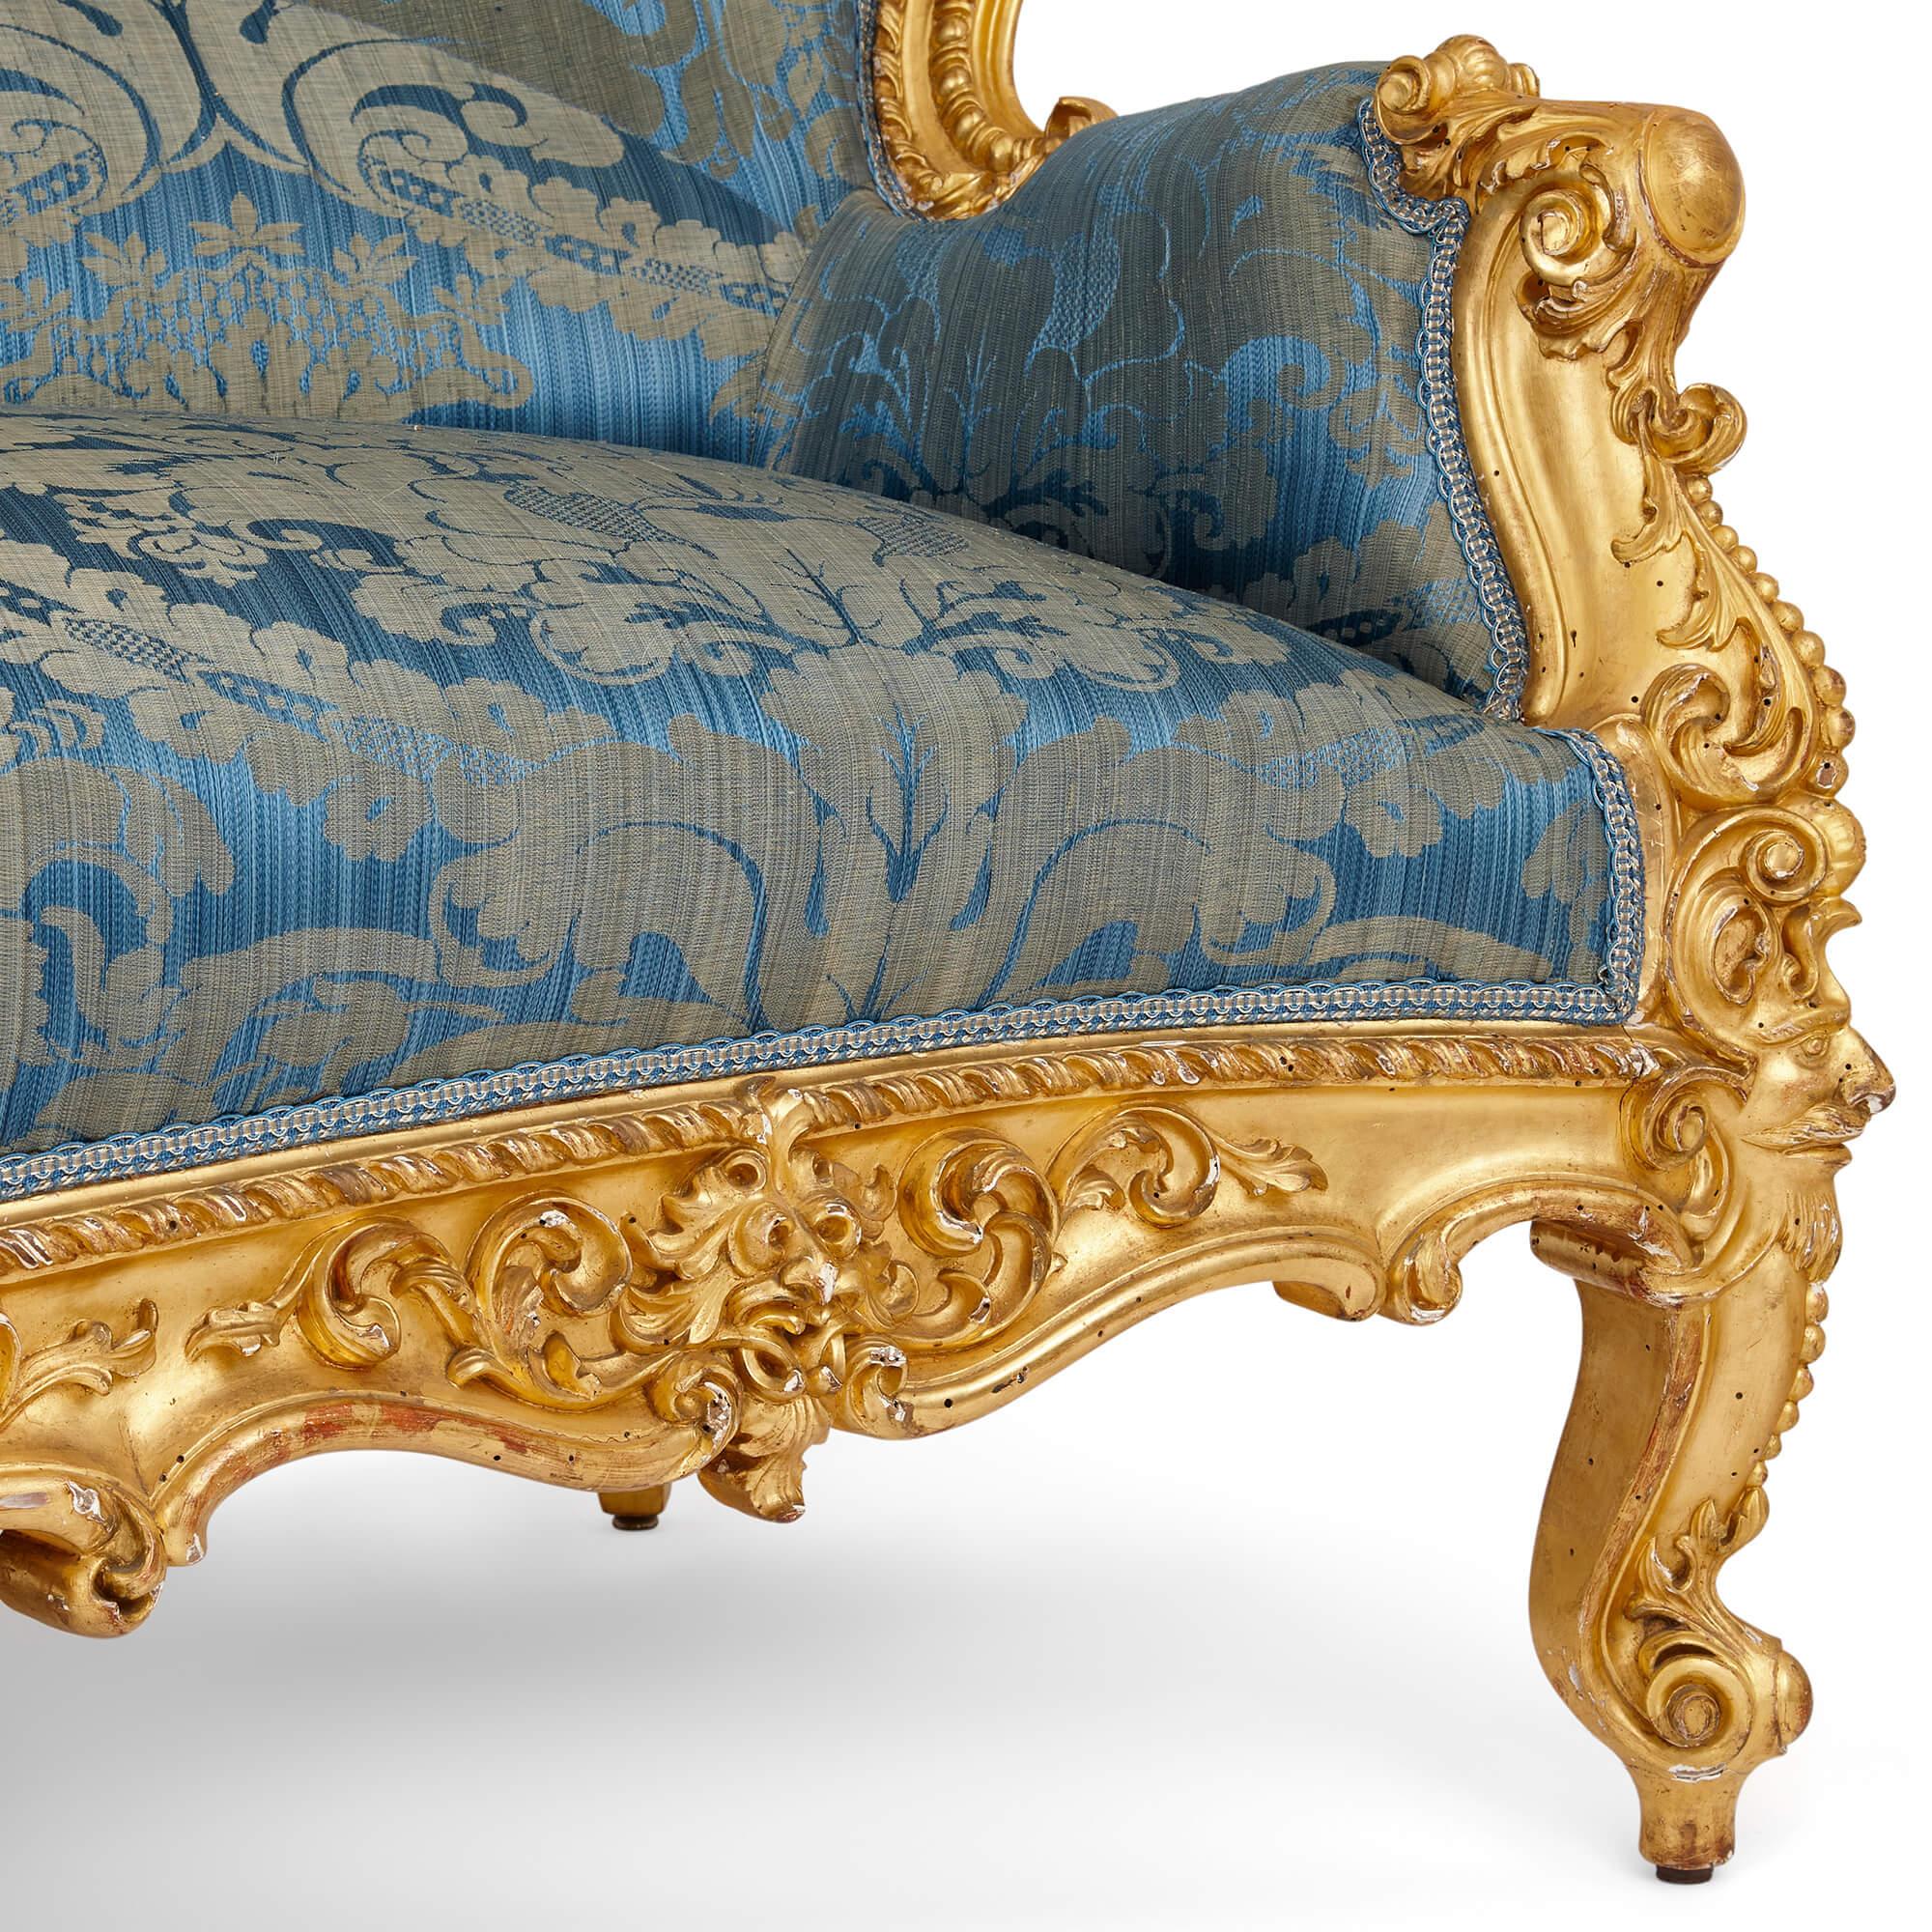 French Large Rococo Revival Carved Giltwood Sofa For Sale